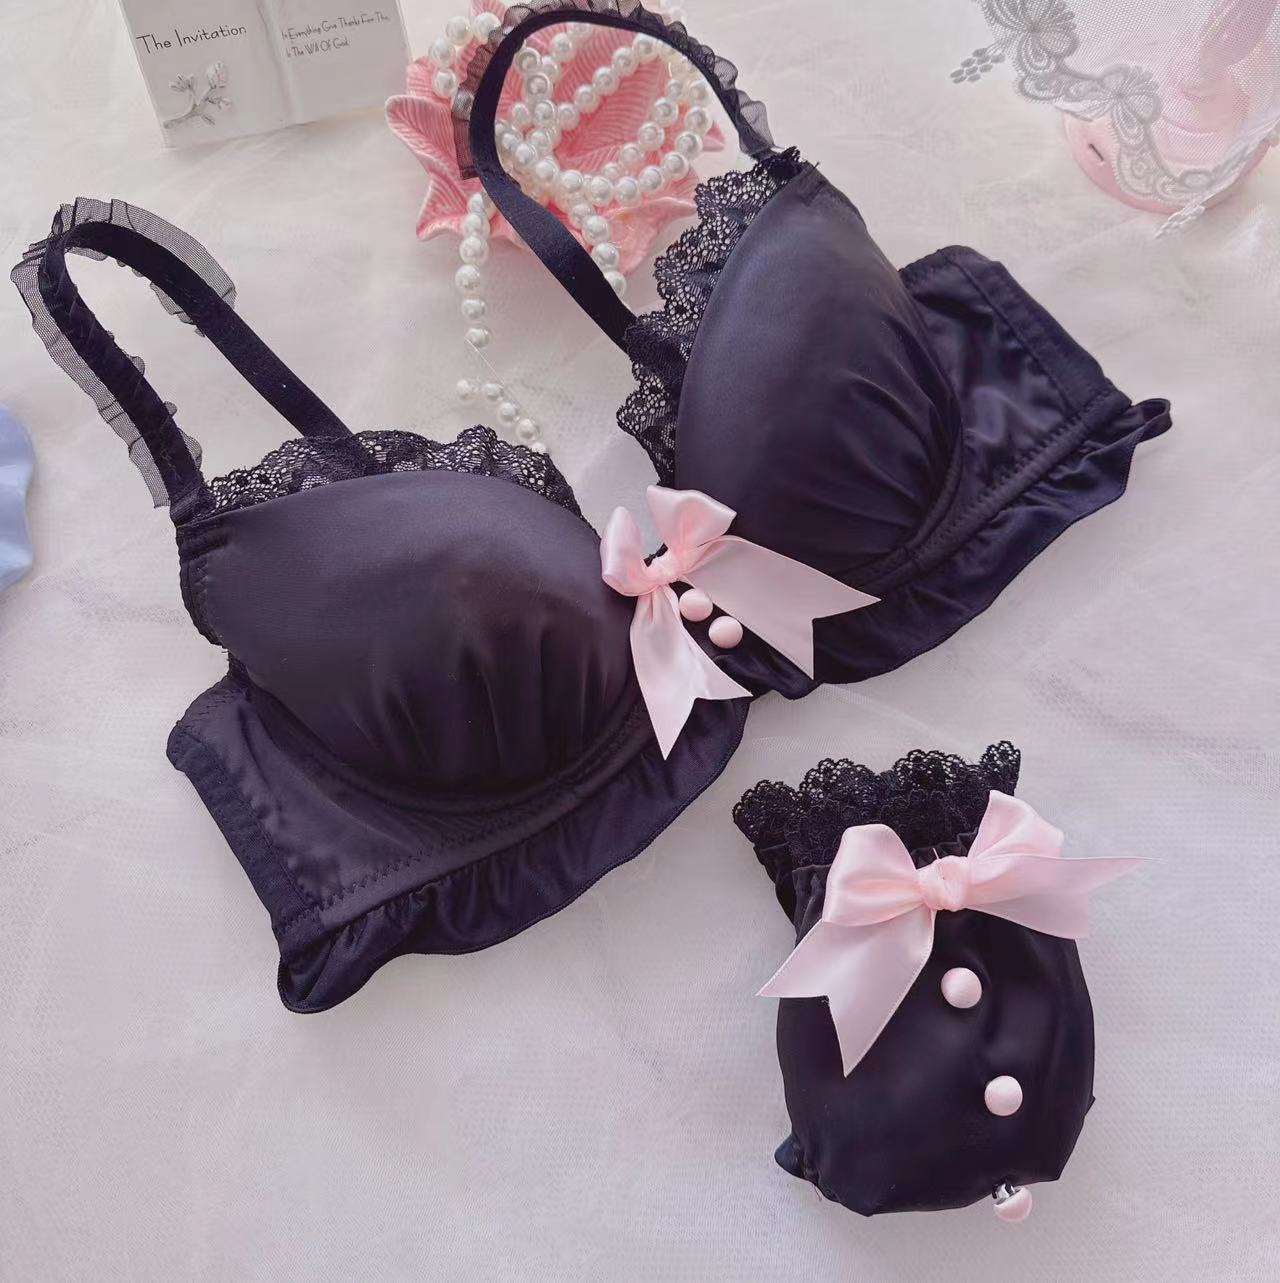 Coquette Womens Bra Set Clothing, Shoes & Jewelry